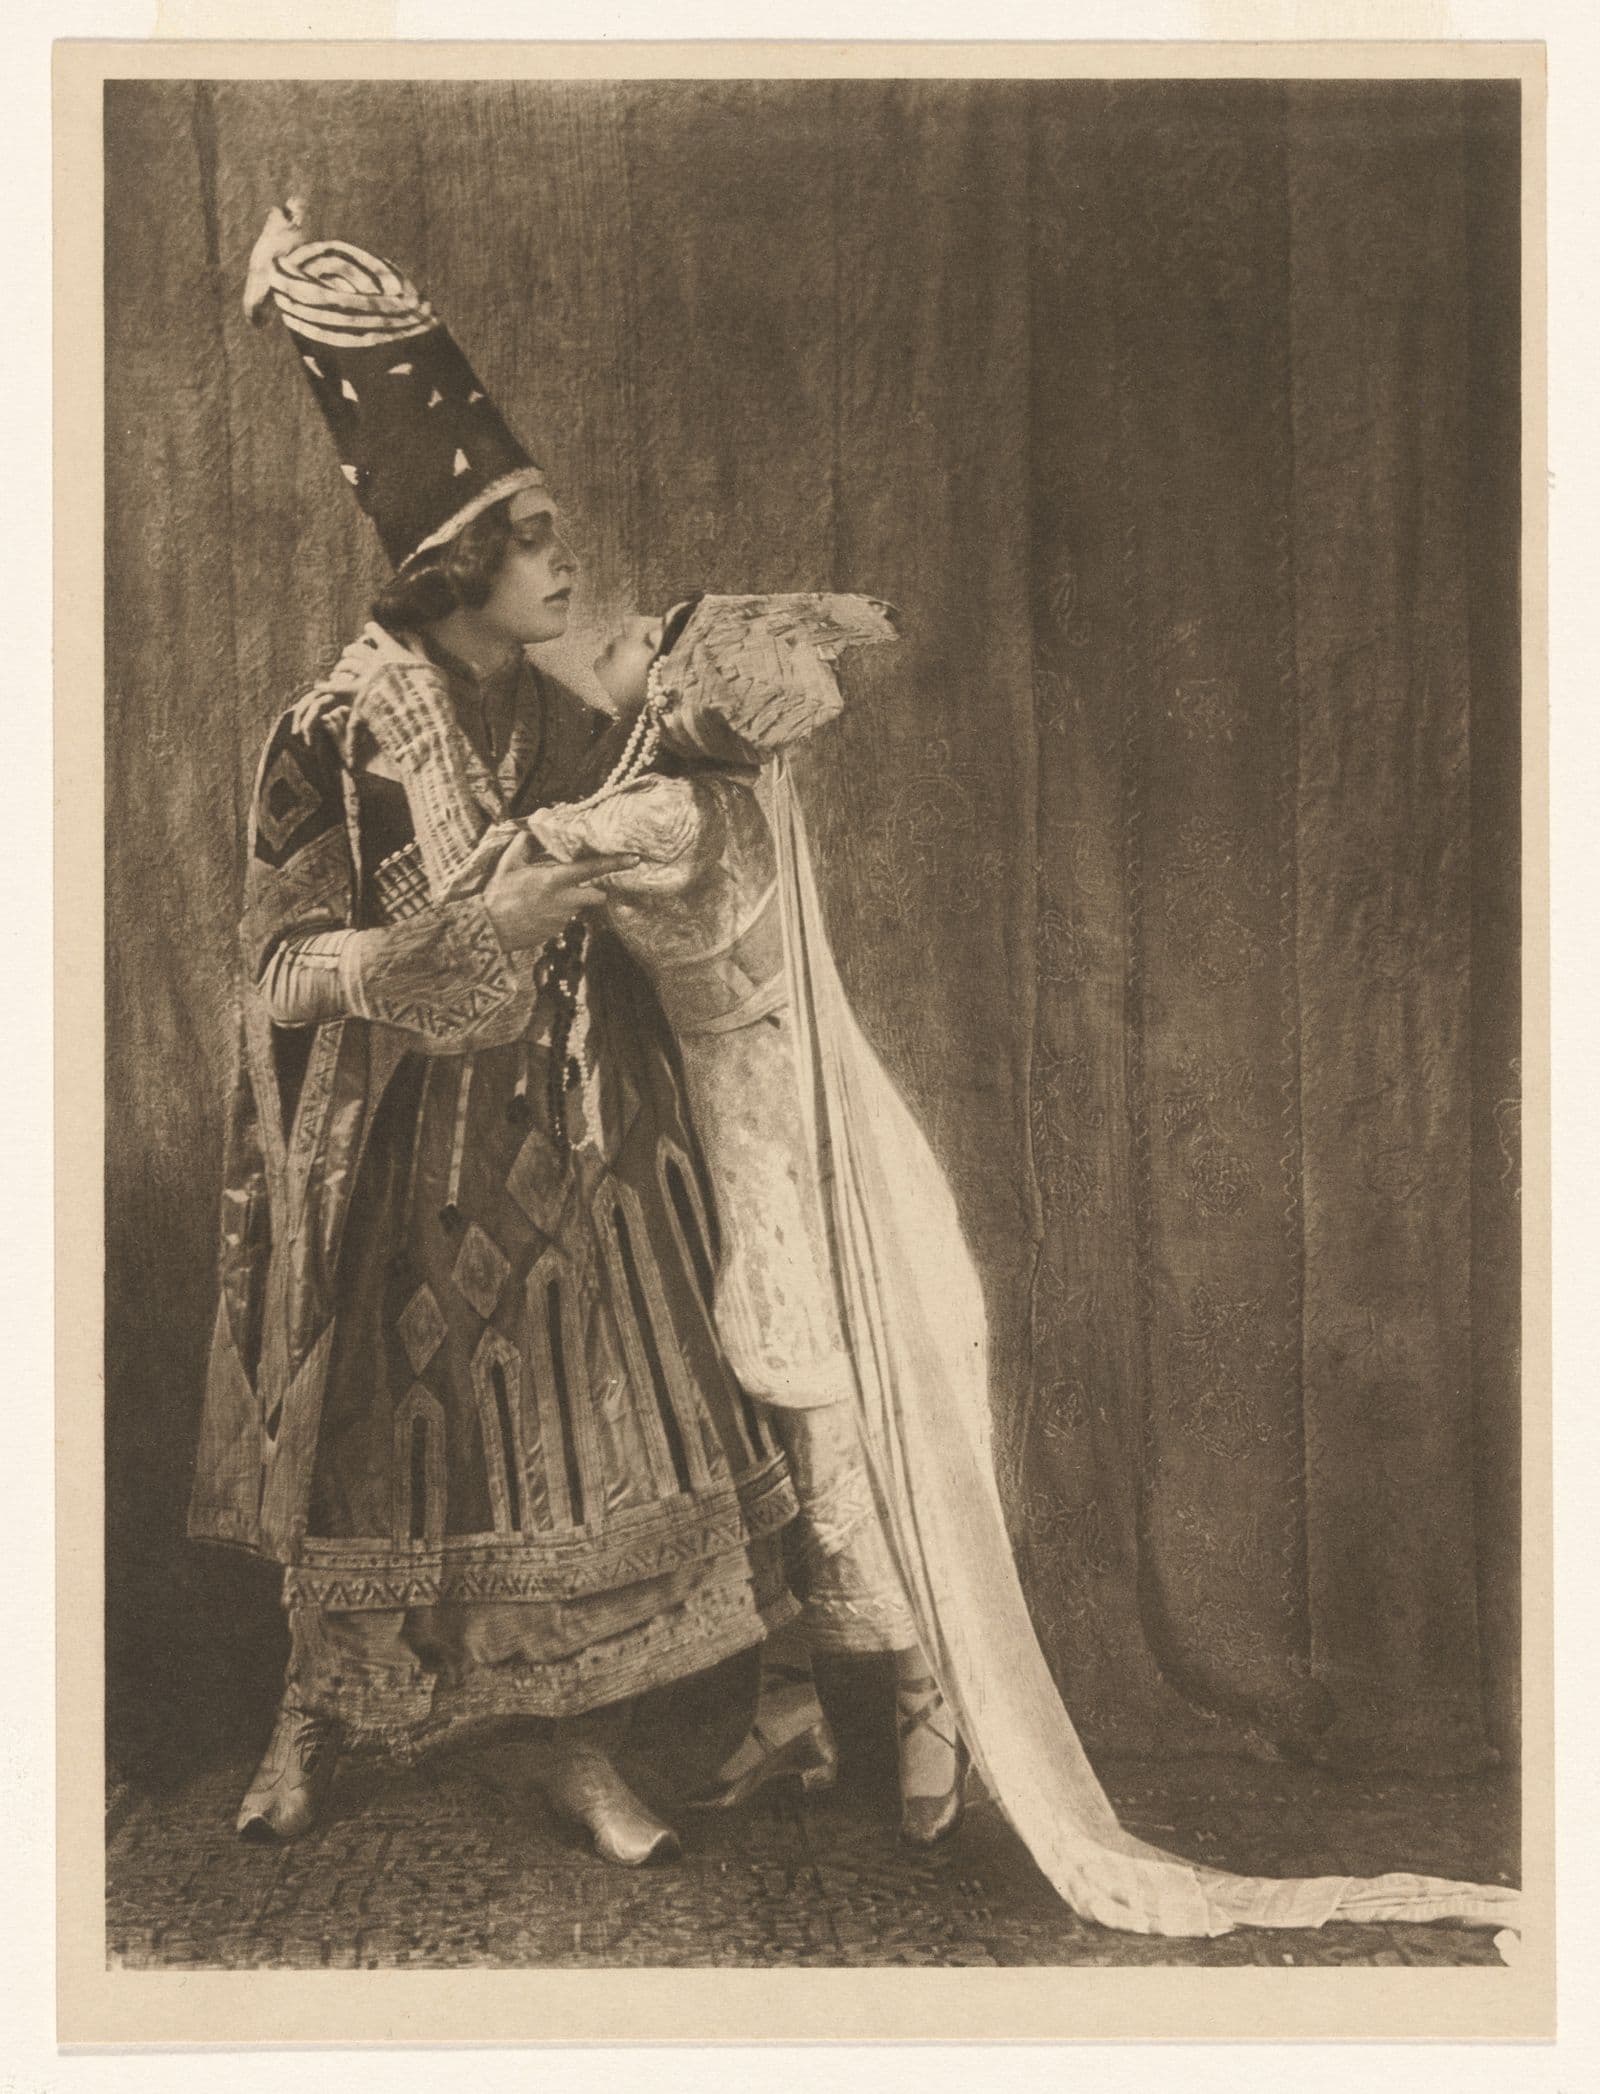 Photograph of two ballet dancers, a man and a woman, in a dramatic embrace. Both dancers are in elaborate costume.